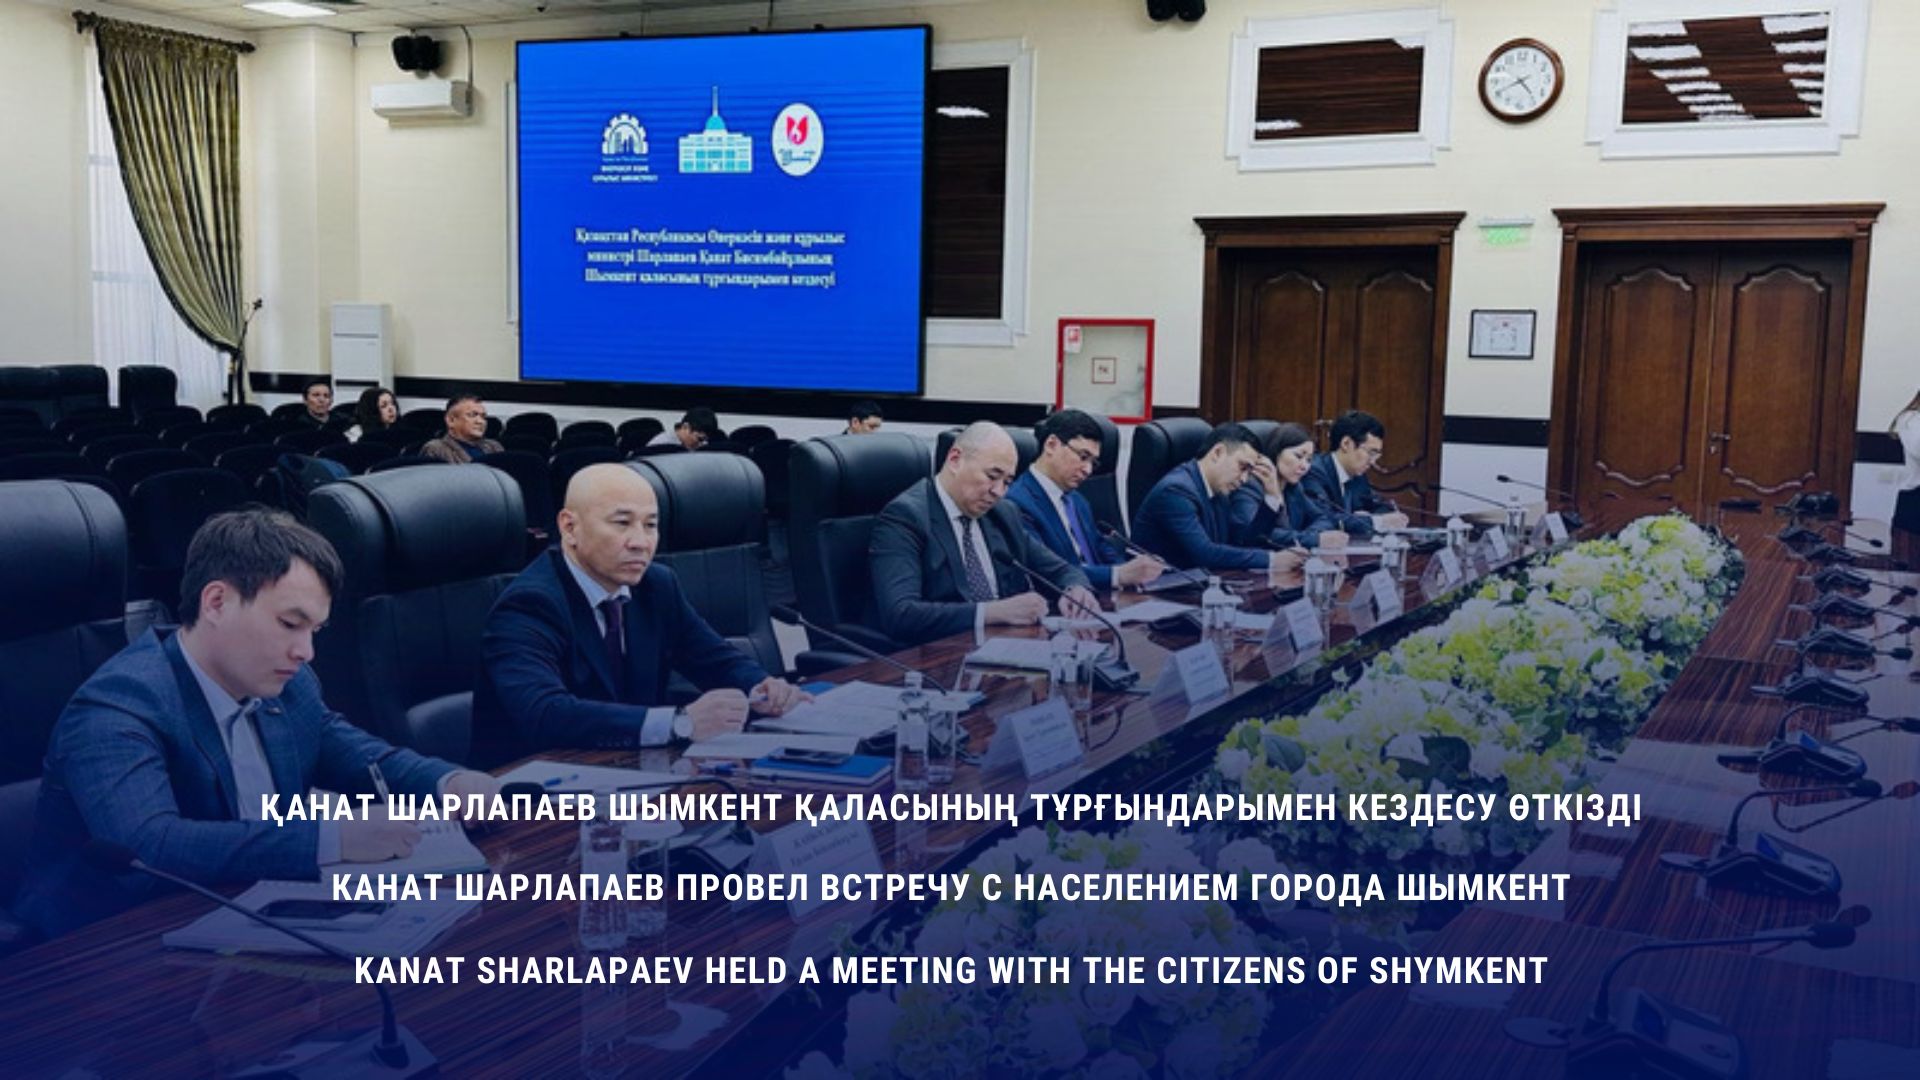 Kanat Sharlapaev held a meeting with the citizens of Shymkent